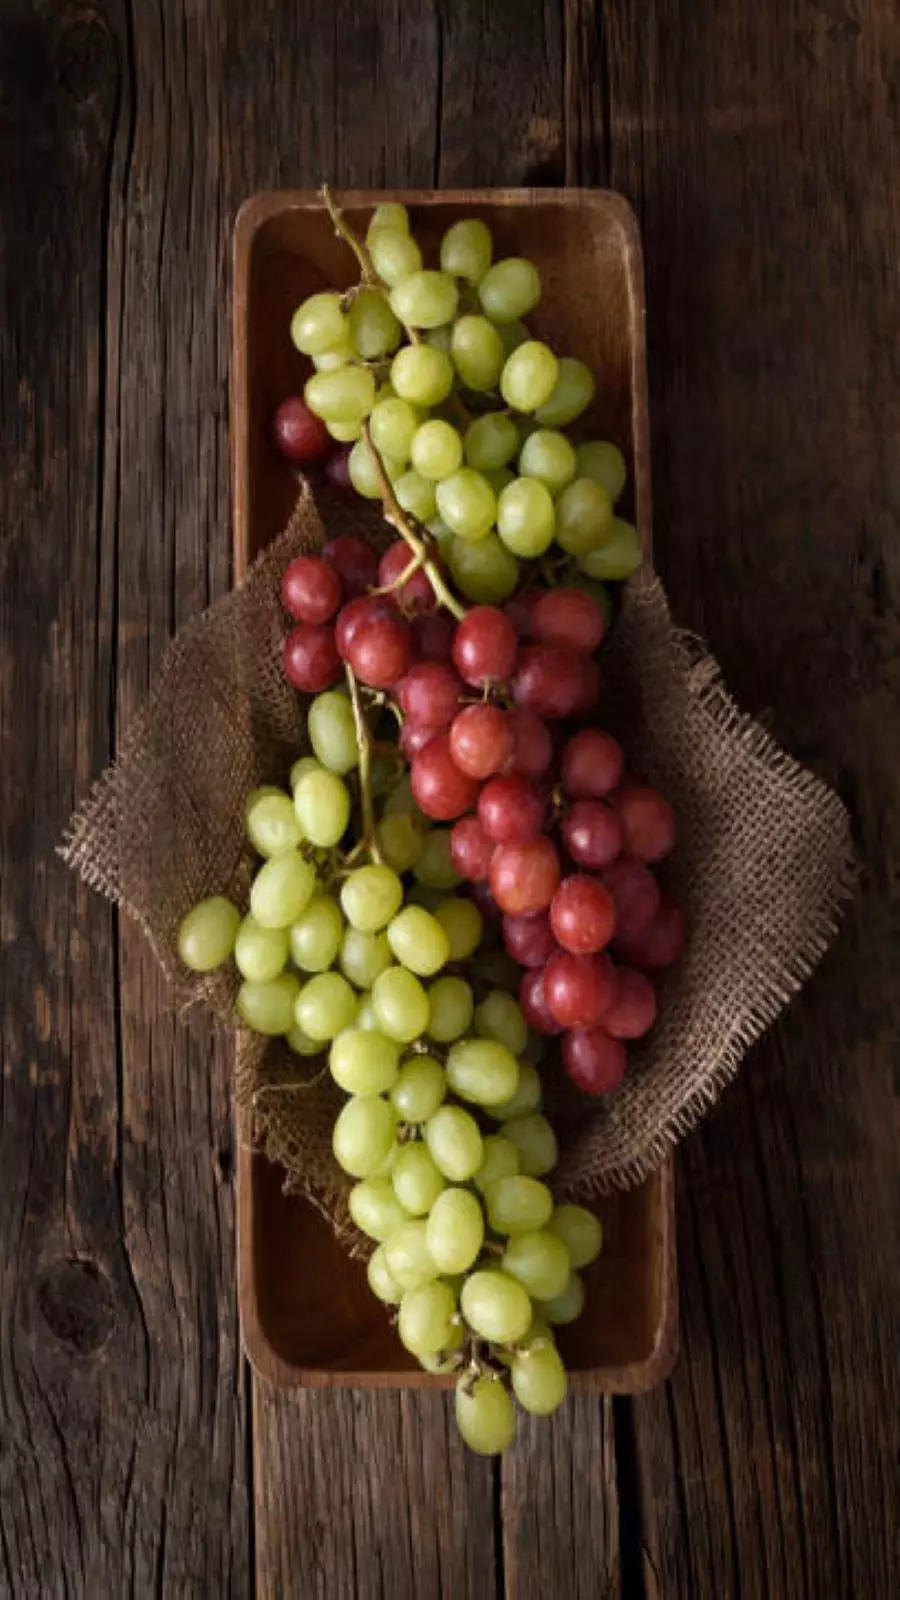 Health benefits of Grapes